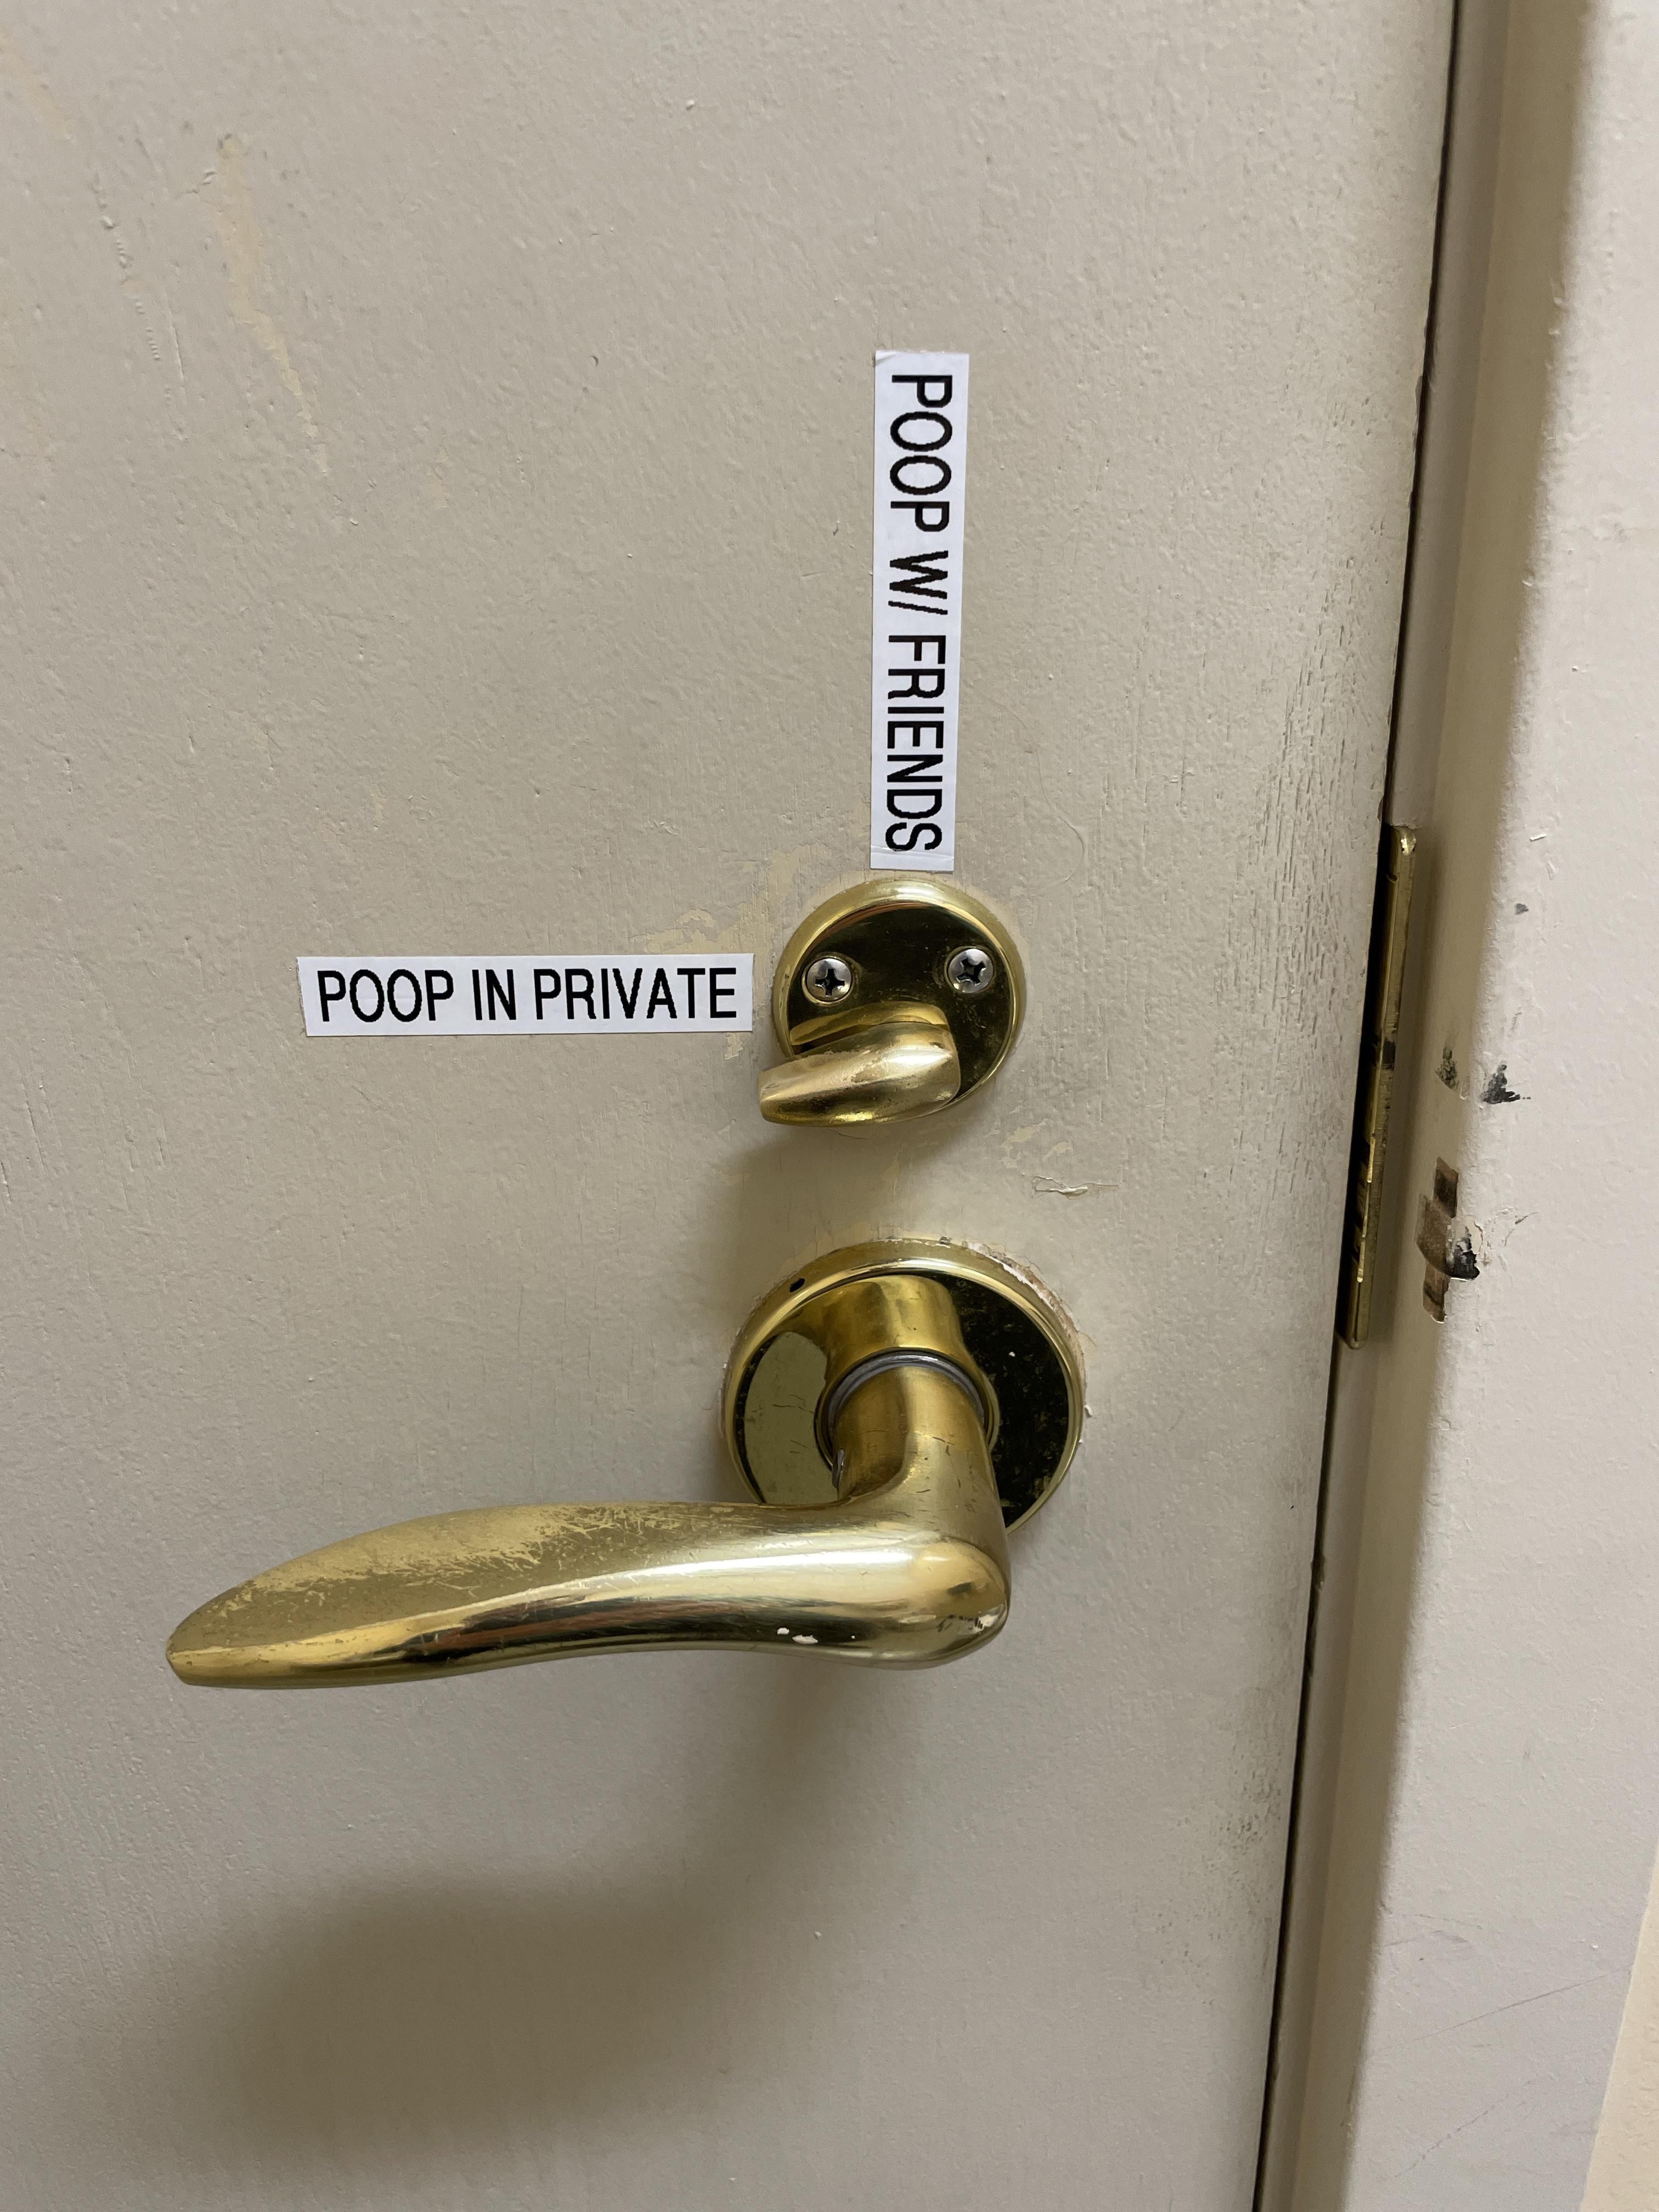 Our facility manager solved all of our confusion with the bathroom lock.